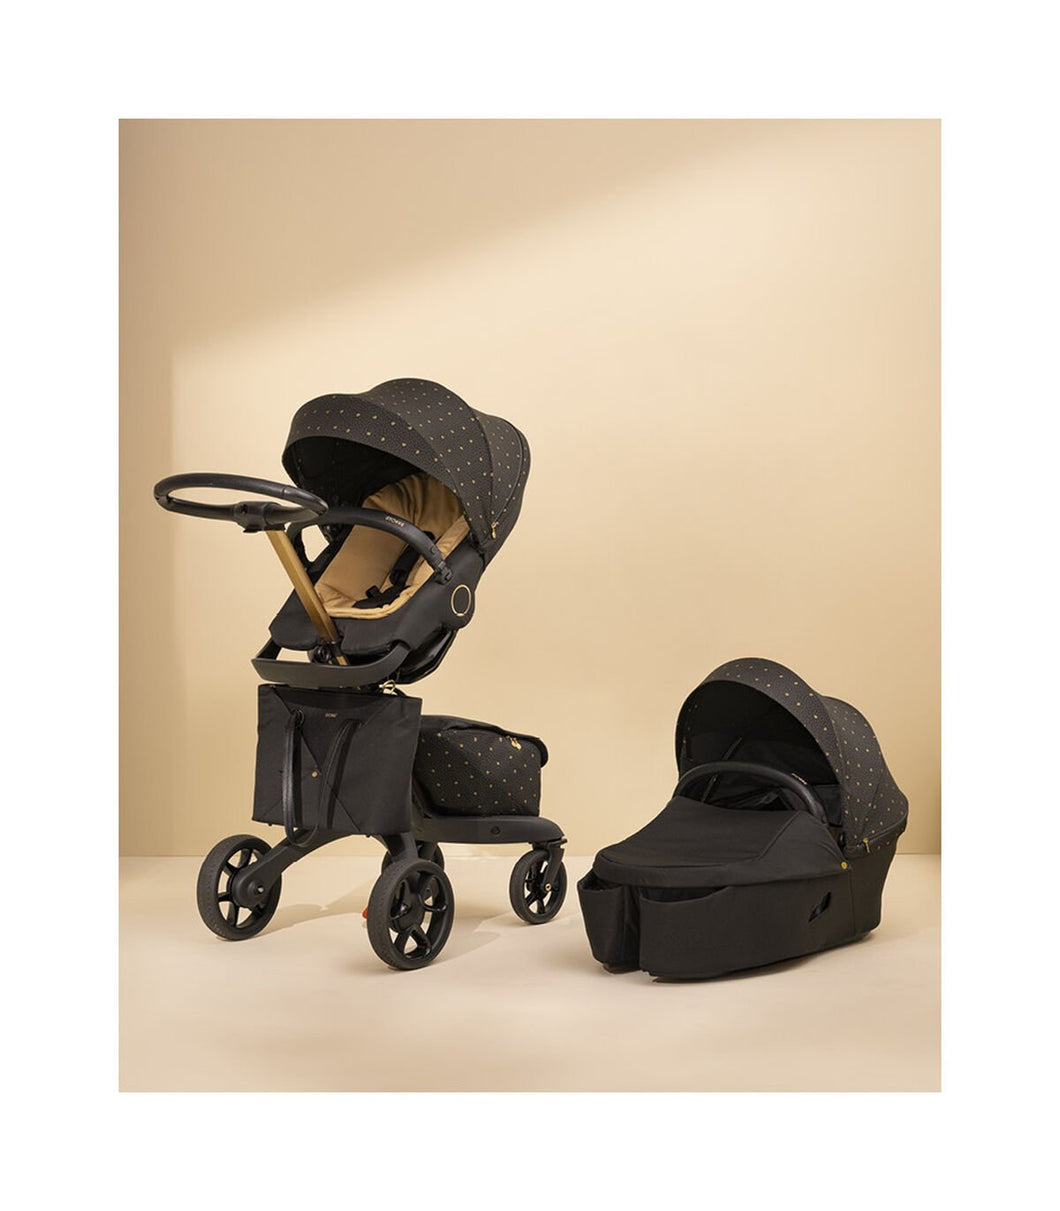 Stokke Xplory X  Complete Stroller Signature Edition